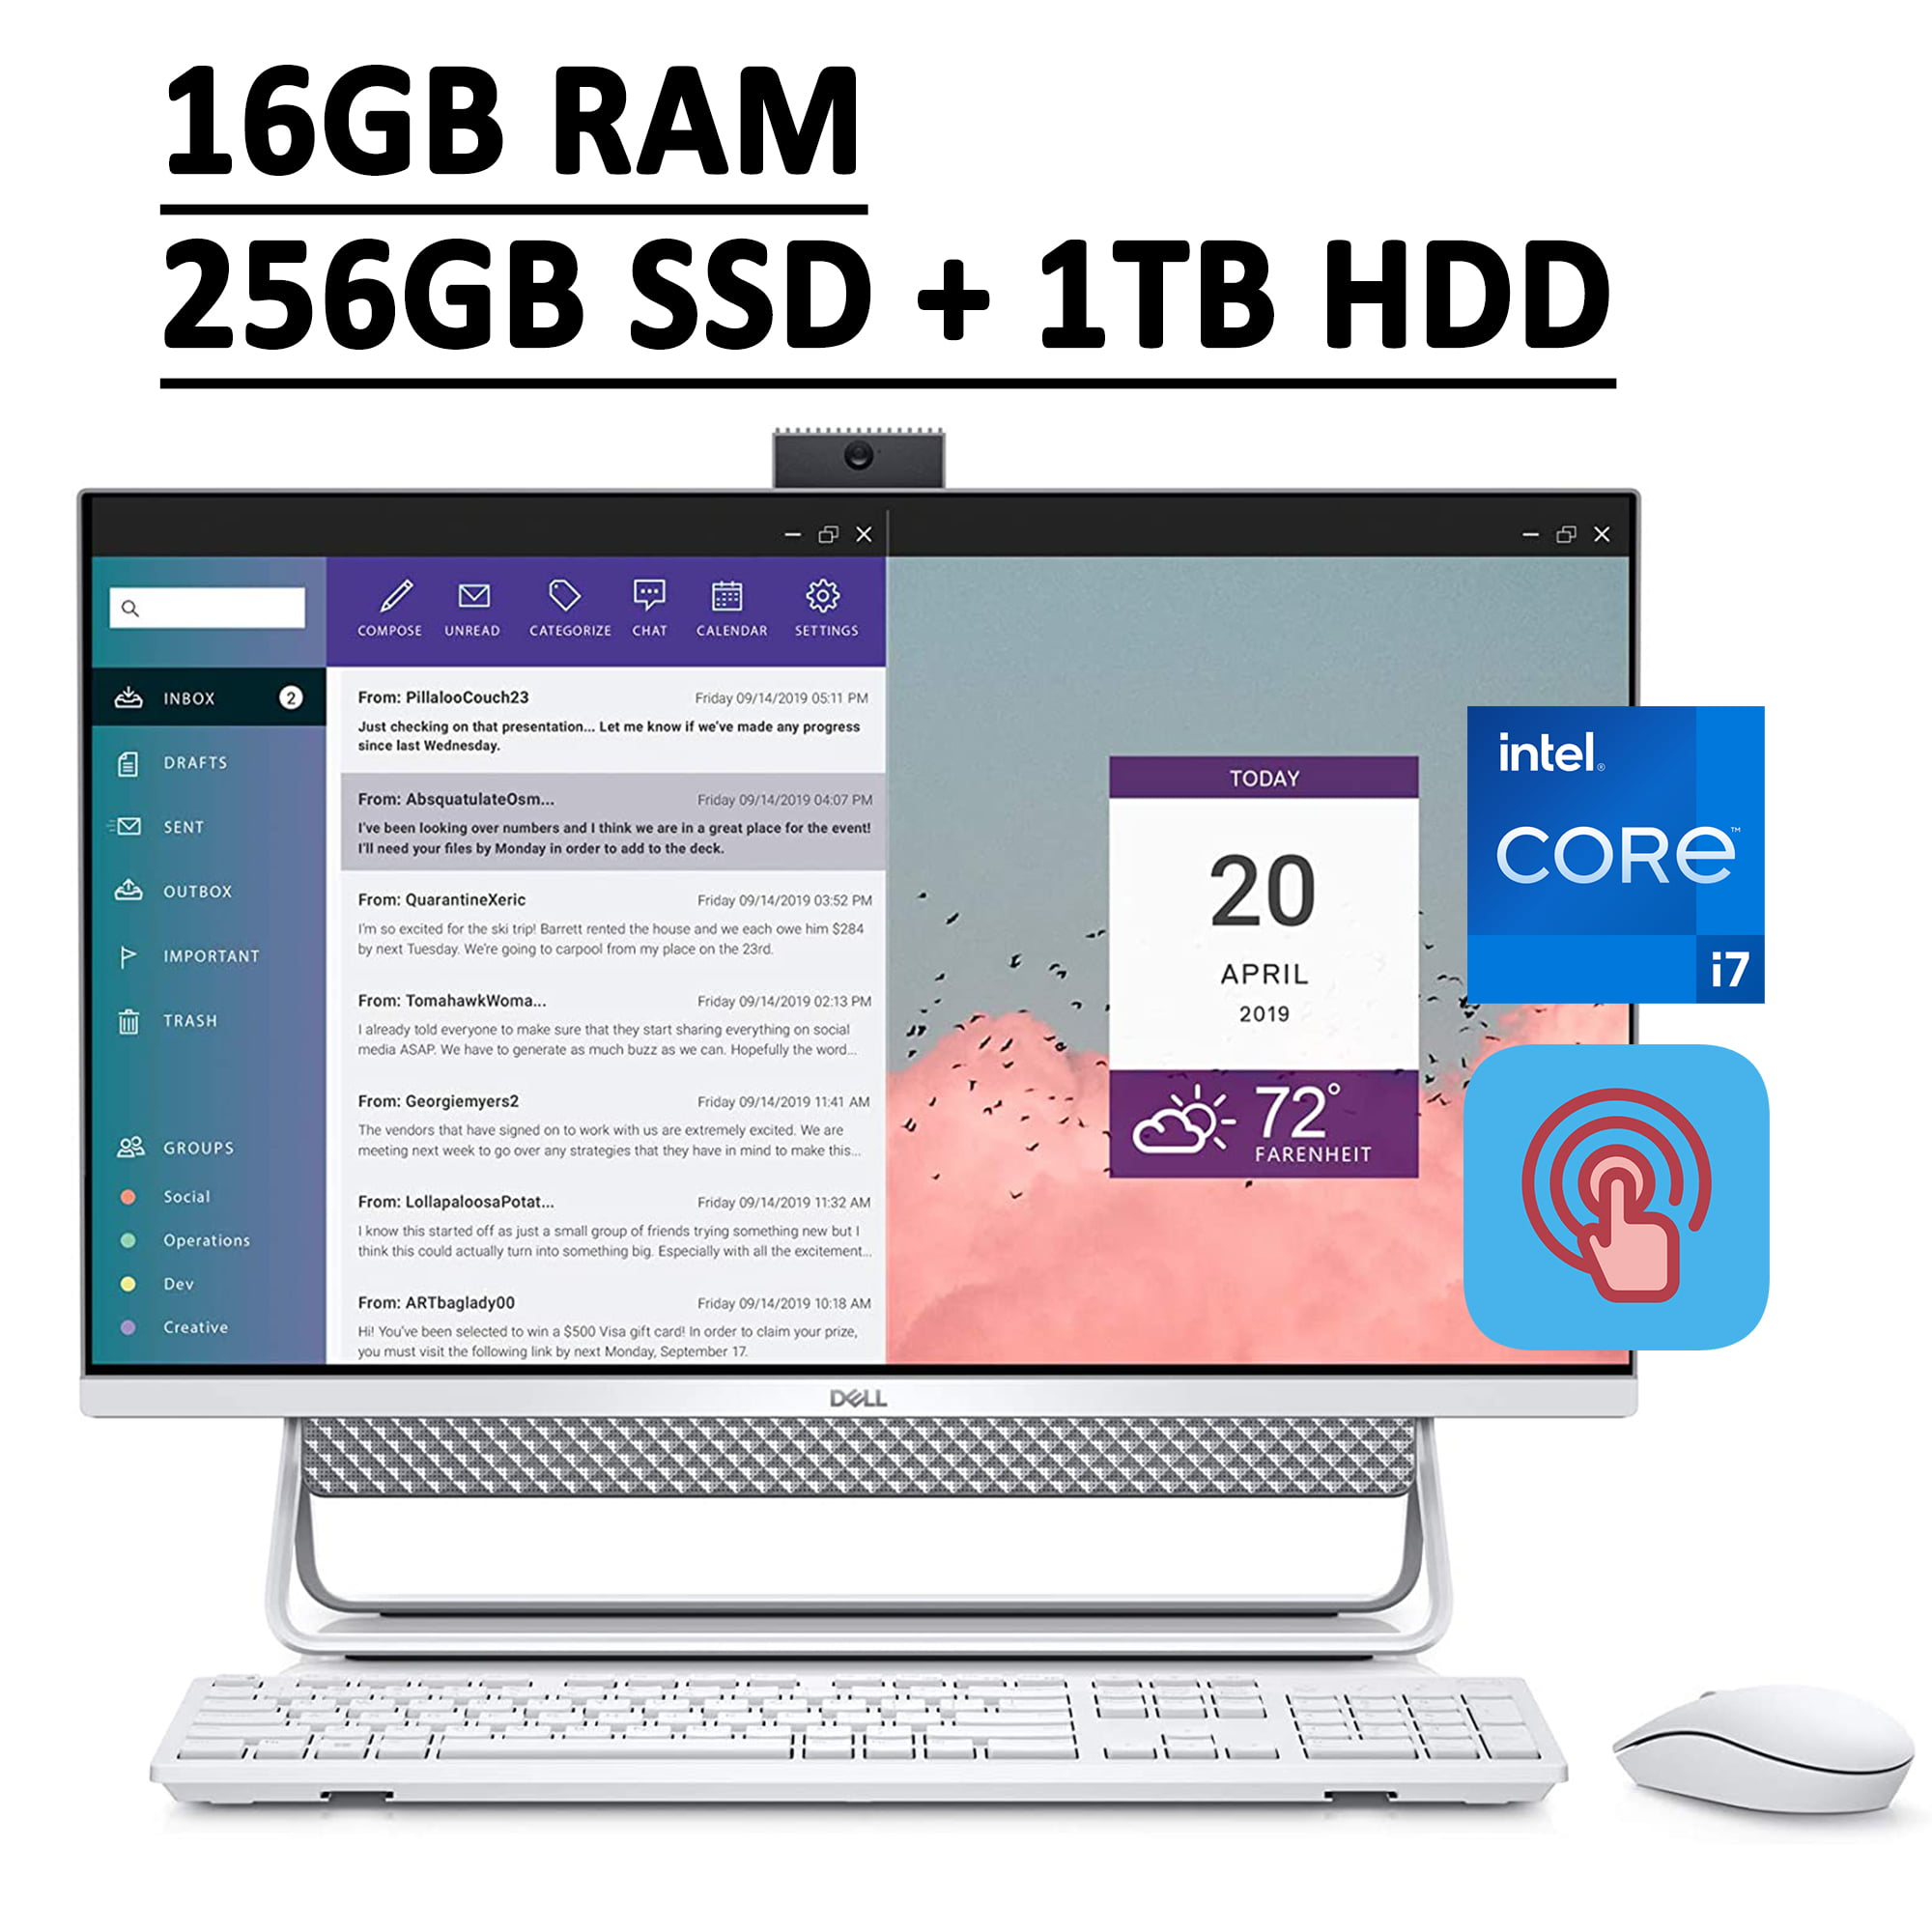 Wireless Keyboard&Mouse Intel Core i5-1135G7 27 FHD IPS Display HDMI 32GB DDR4 RAM 1TB SSD Win 10 Home Pop-up Webcam 2021 Dell Inspiron 27 7700 All-in-One Desktop